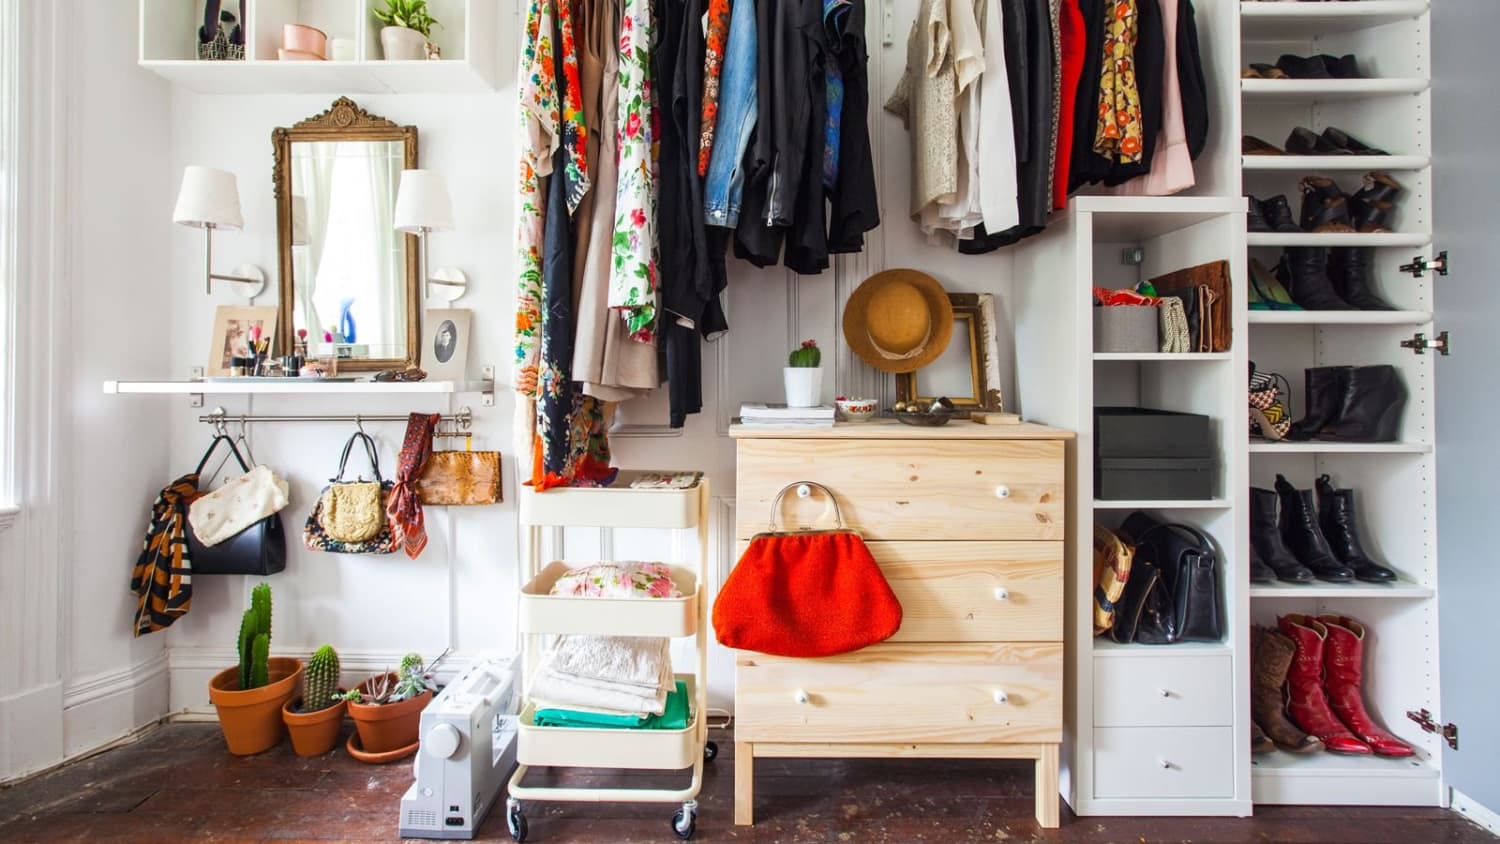 23 Space-saving Ideas To Dry Clothes In A Small Apartment - Tiny